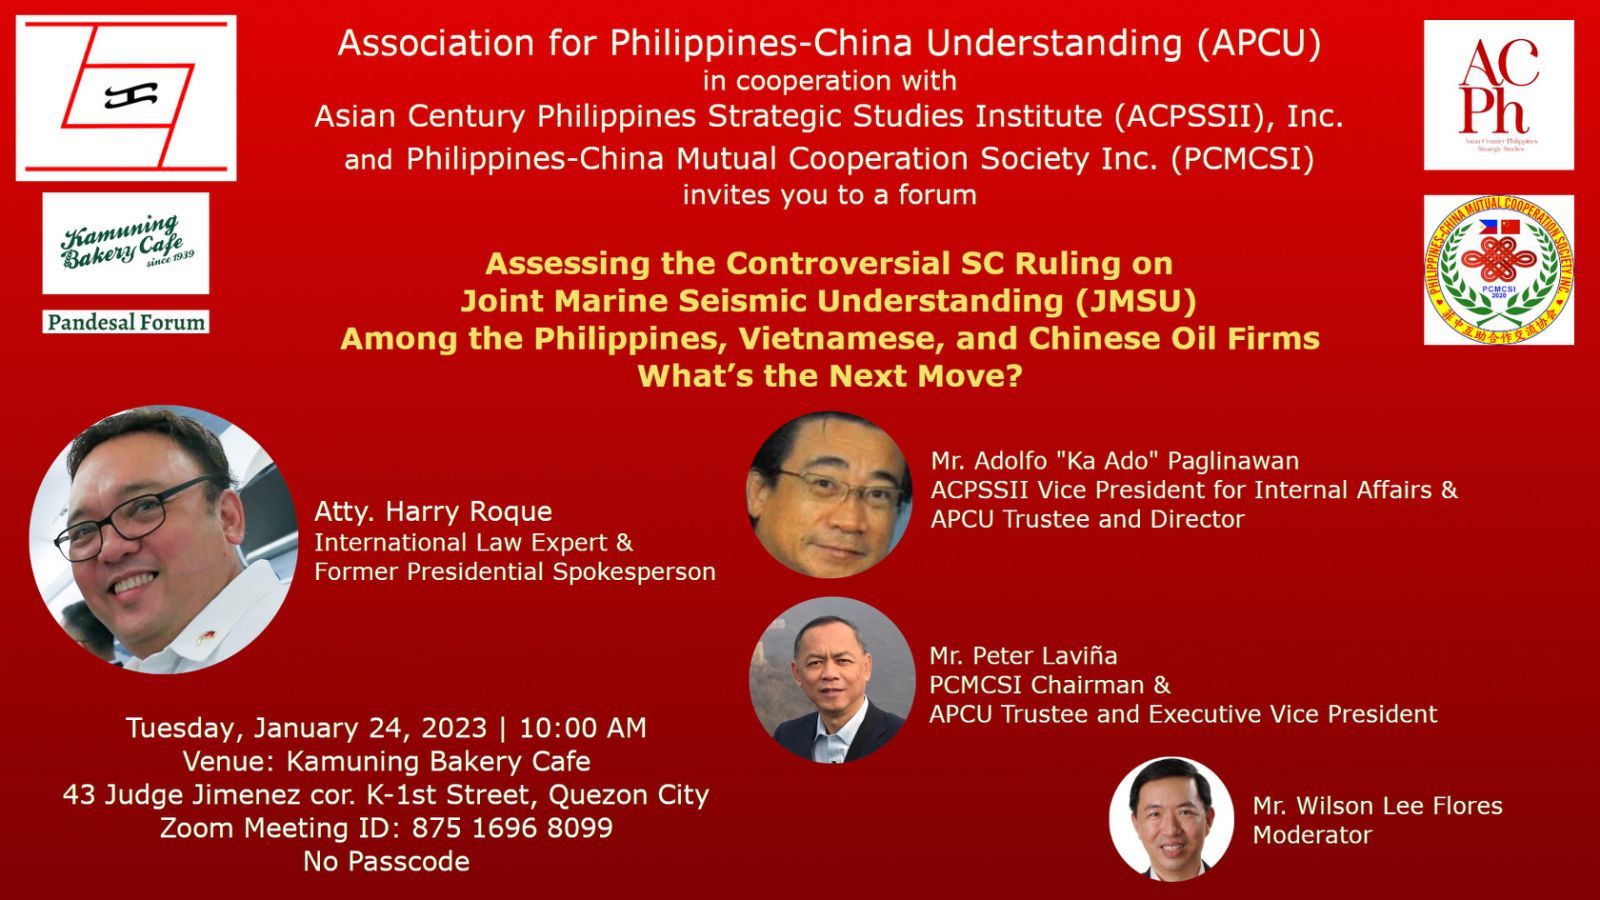 Assessing the Controversial SC Ruling on Joint Marine Seismic Understanding (JMSU) Among the Philippines, Vietnamese, and Chinese Oil Firms What’s the Next Move?